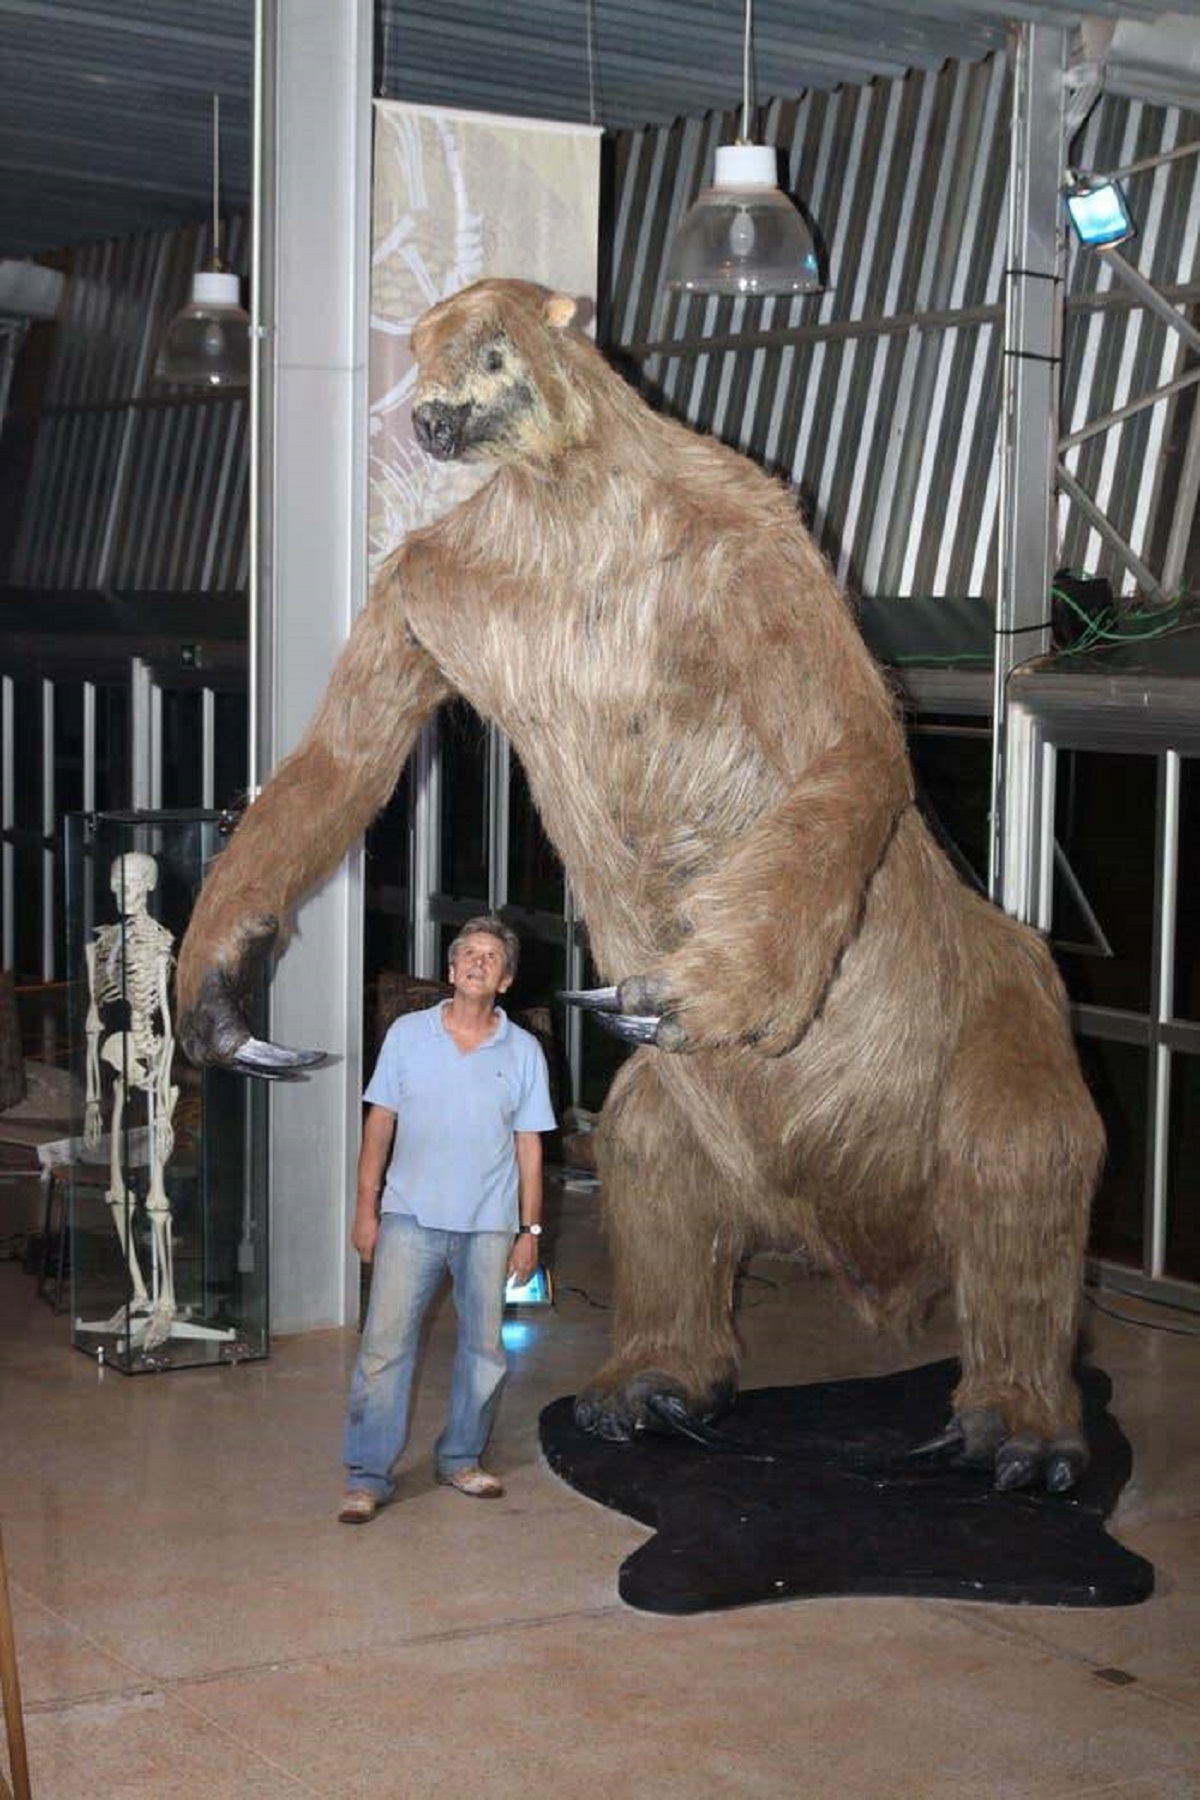 This is how big the Eremotherium Laurillardi, also known as the giant ground sloth, was compared to a modern day human:

It lived in the modern day Americas and went extinct about 12,000 years ago. Would love to play some hoops with this bad boy.